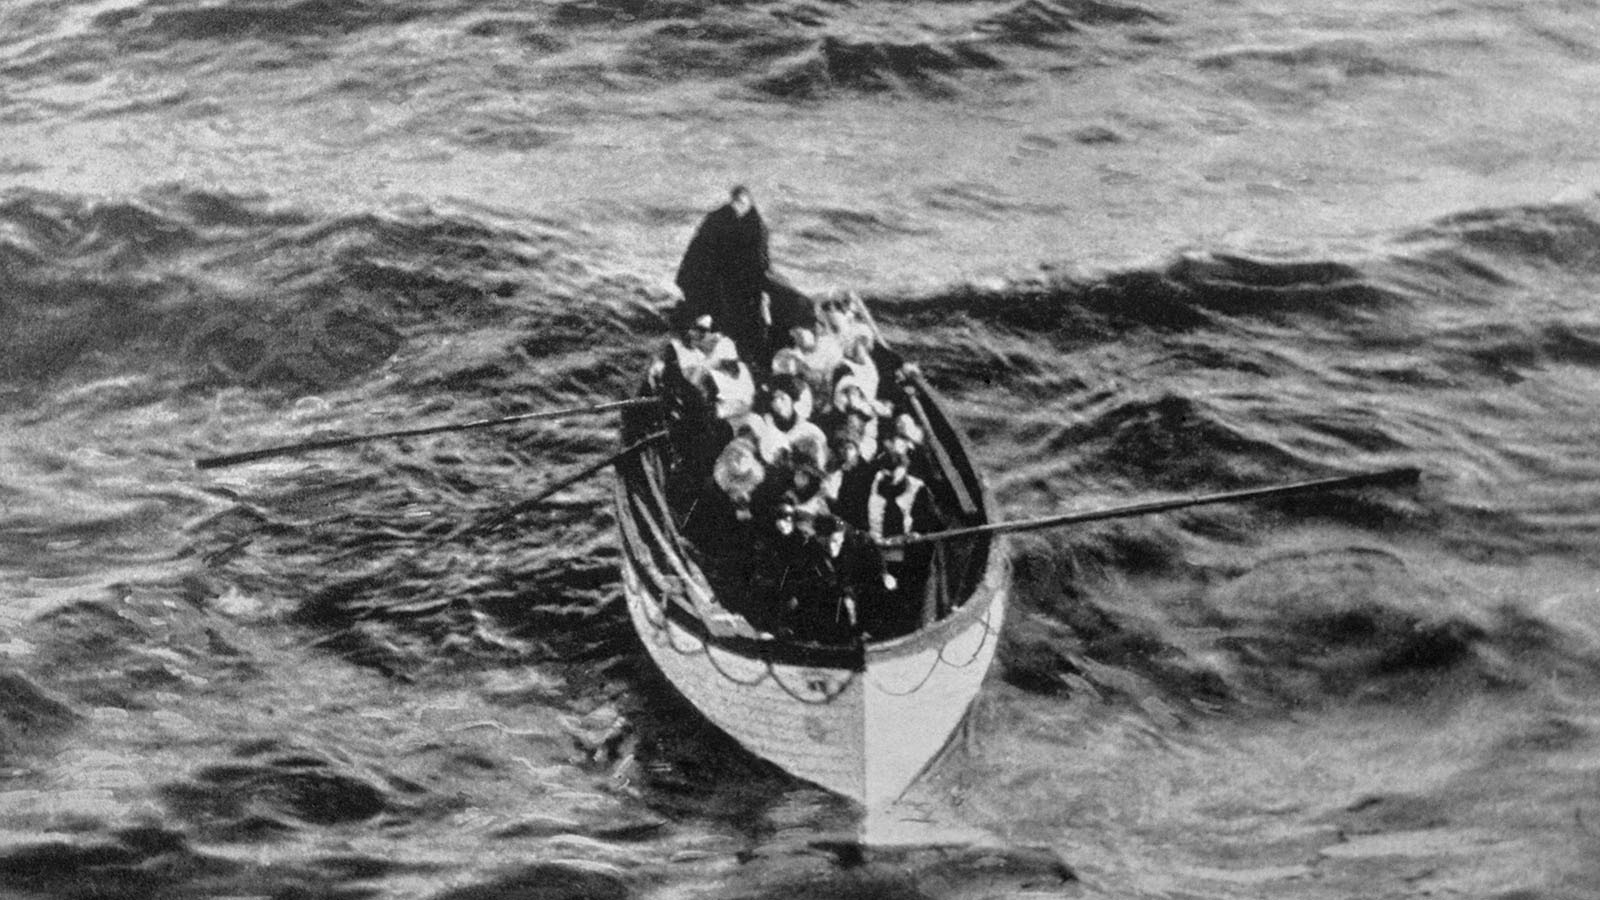 An emergency cutter lifeboat carrying a few survivors from the Titanic, seen floating near the rescue ship Carpathia on the morning of April 15, 1912, hours after the disaster. Titanic did not carry enough lifeboats to save all her passengers, and many of the available boats were launched carrying fewer than their 65-passenger capacity.